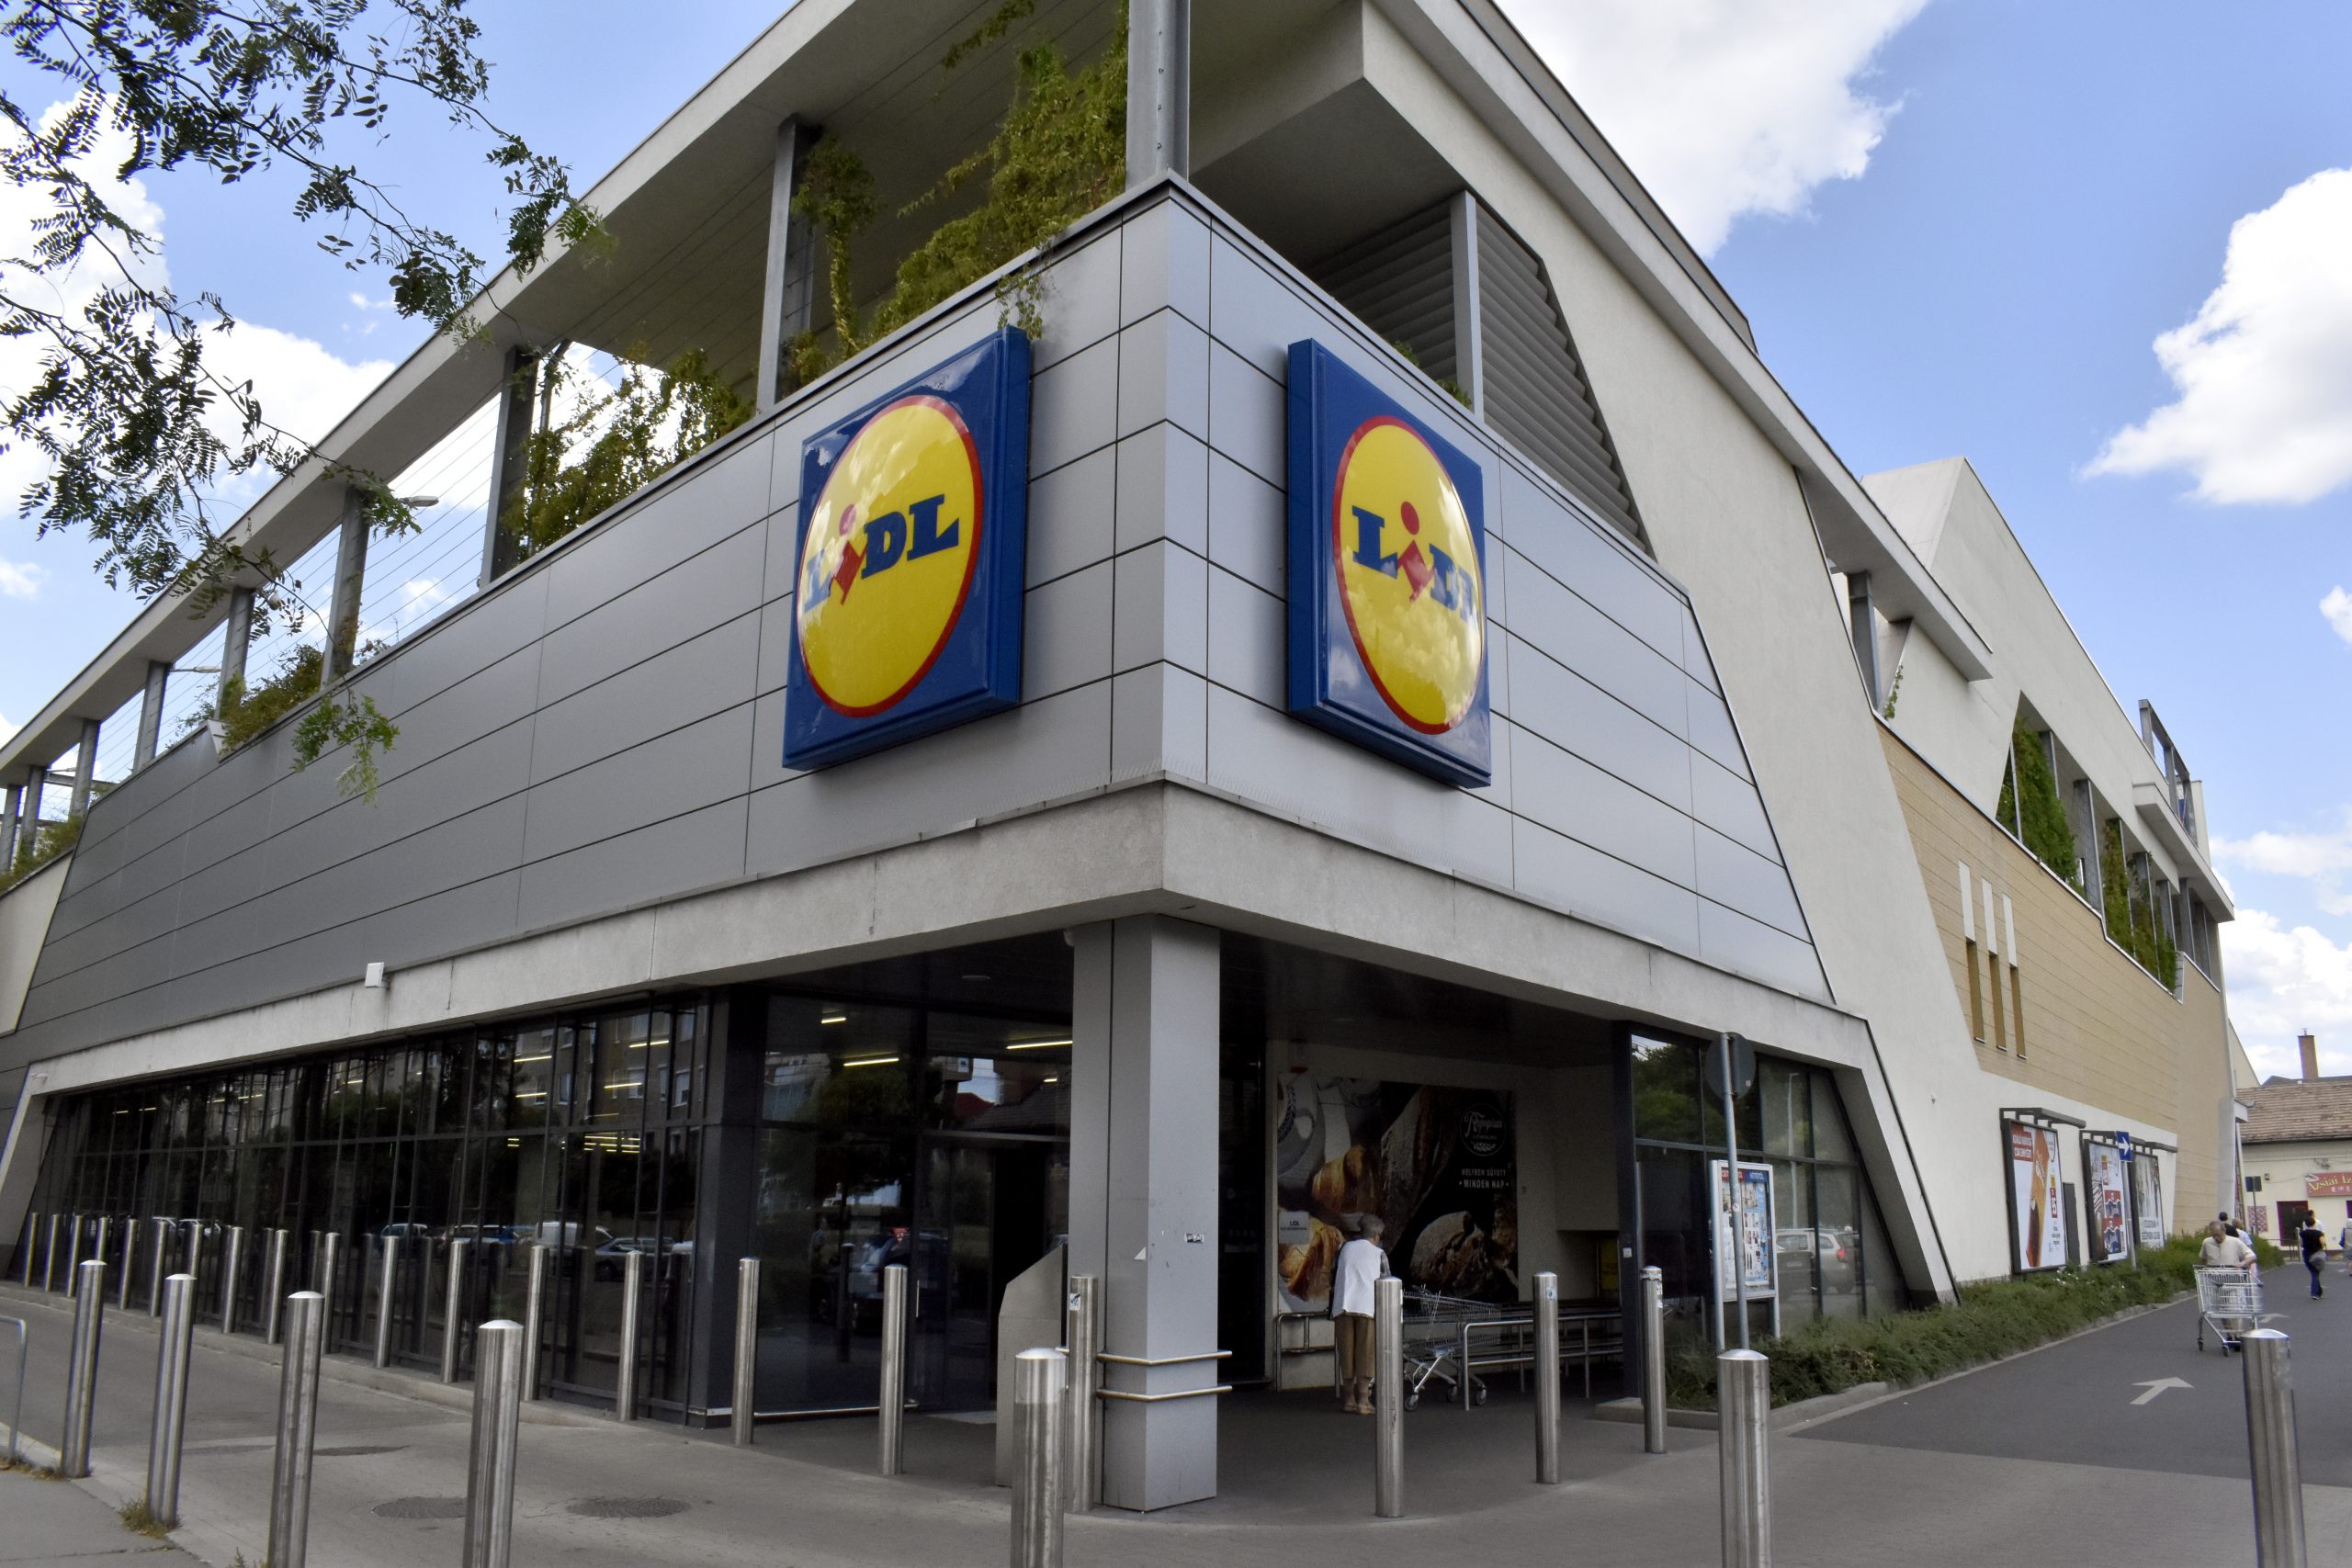 Price Comparison of Italian and Hungarian Lidl Stores